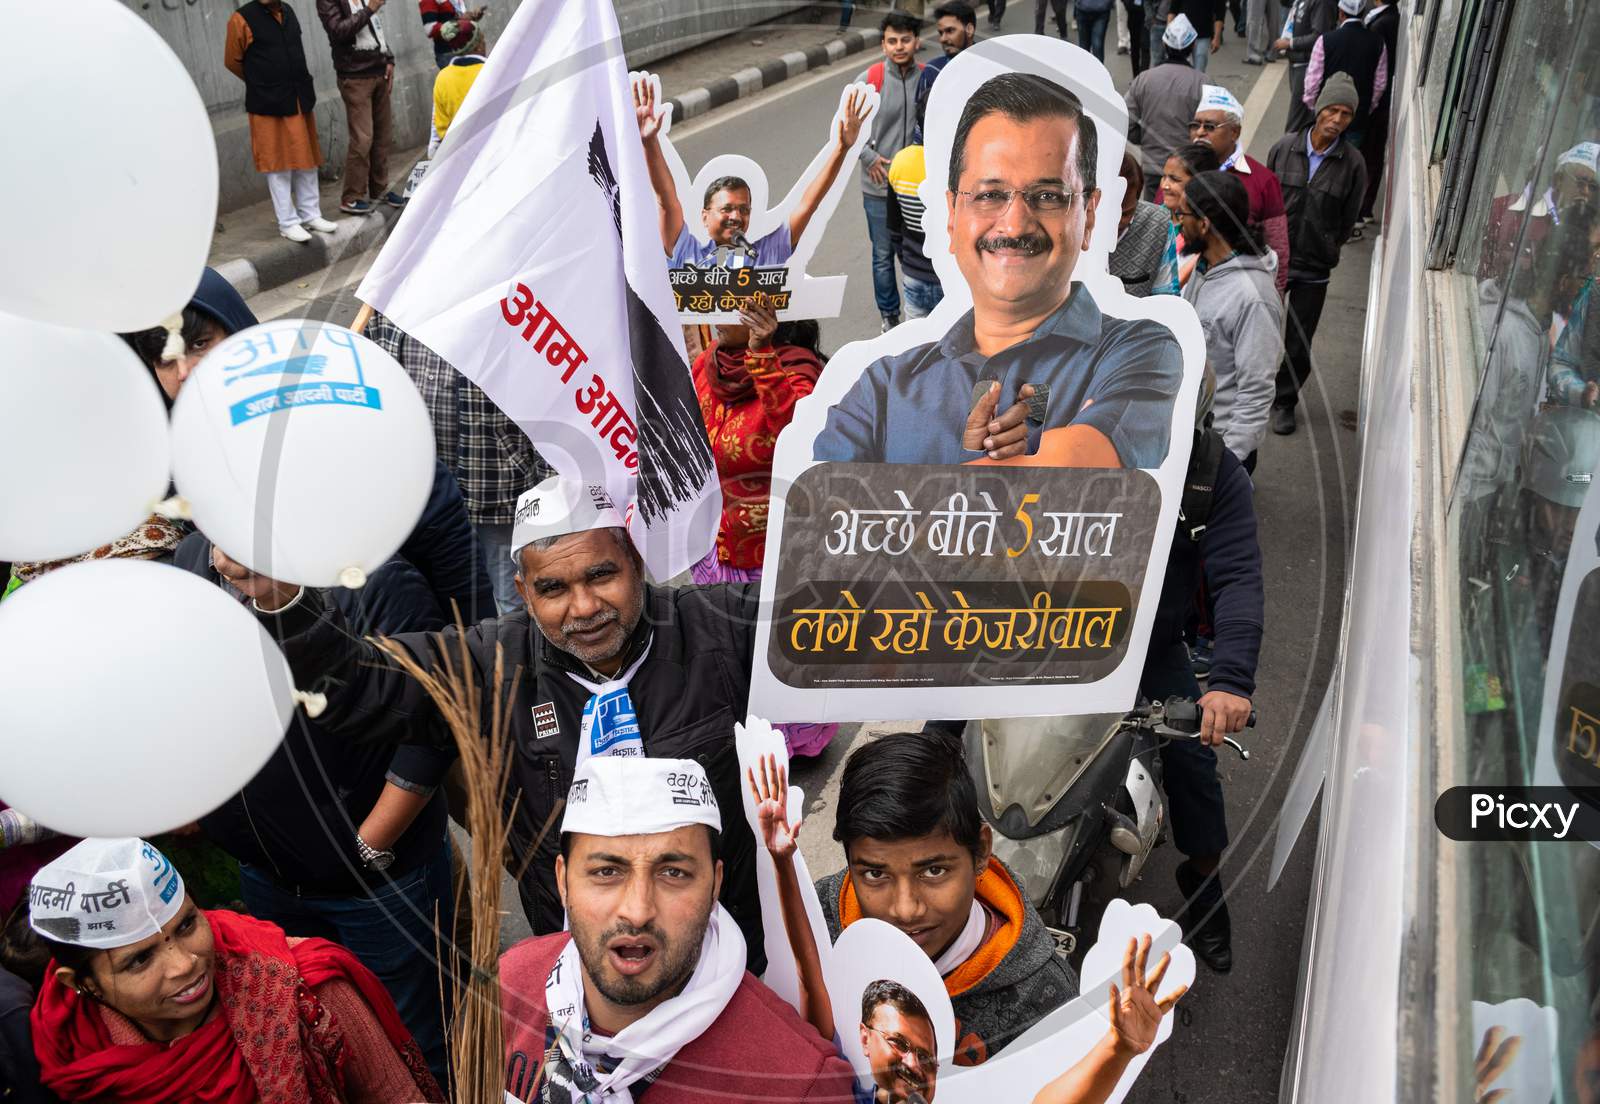 Aam Aadmi Party AAP supporter holding cutout of Arvind Kejriwal, flag and AAP electoral symbol Broom during a rally for Delhi Assembly Election